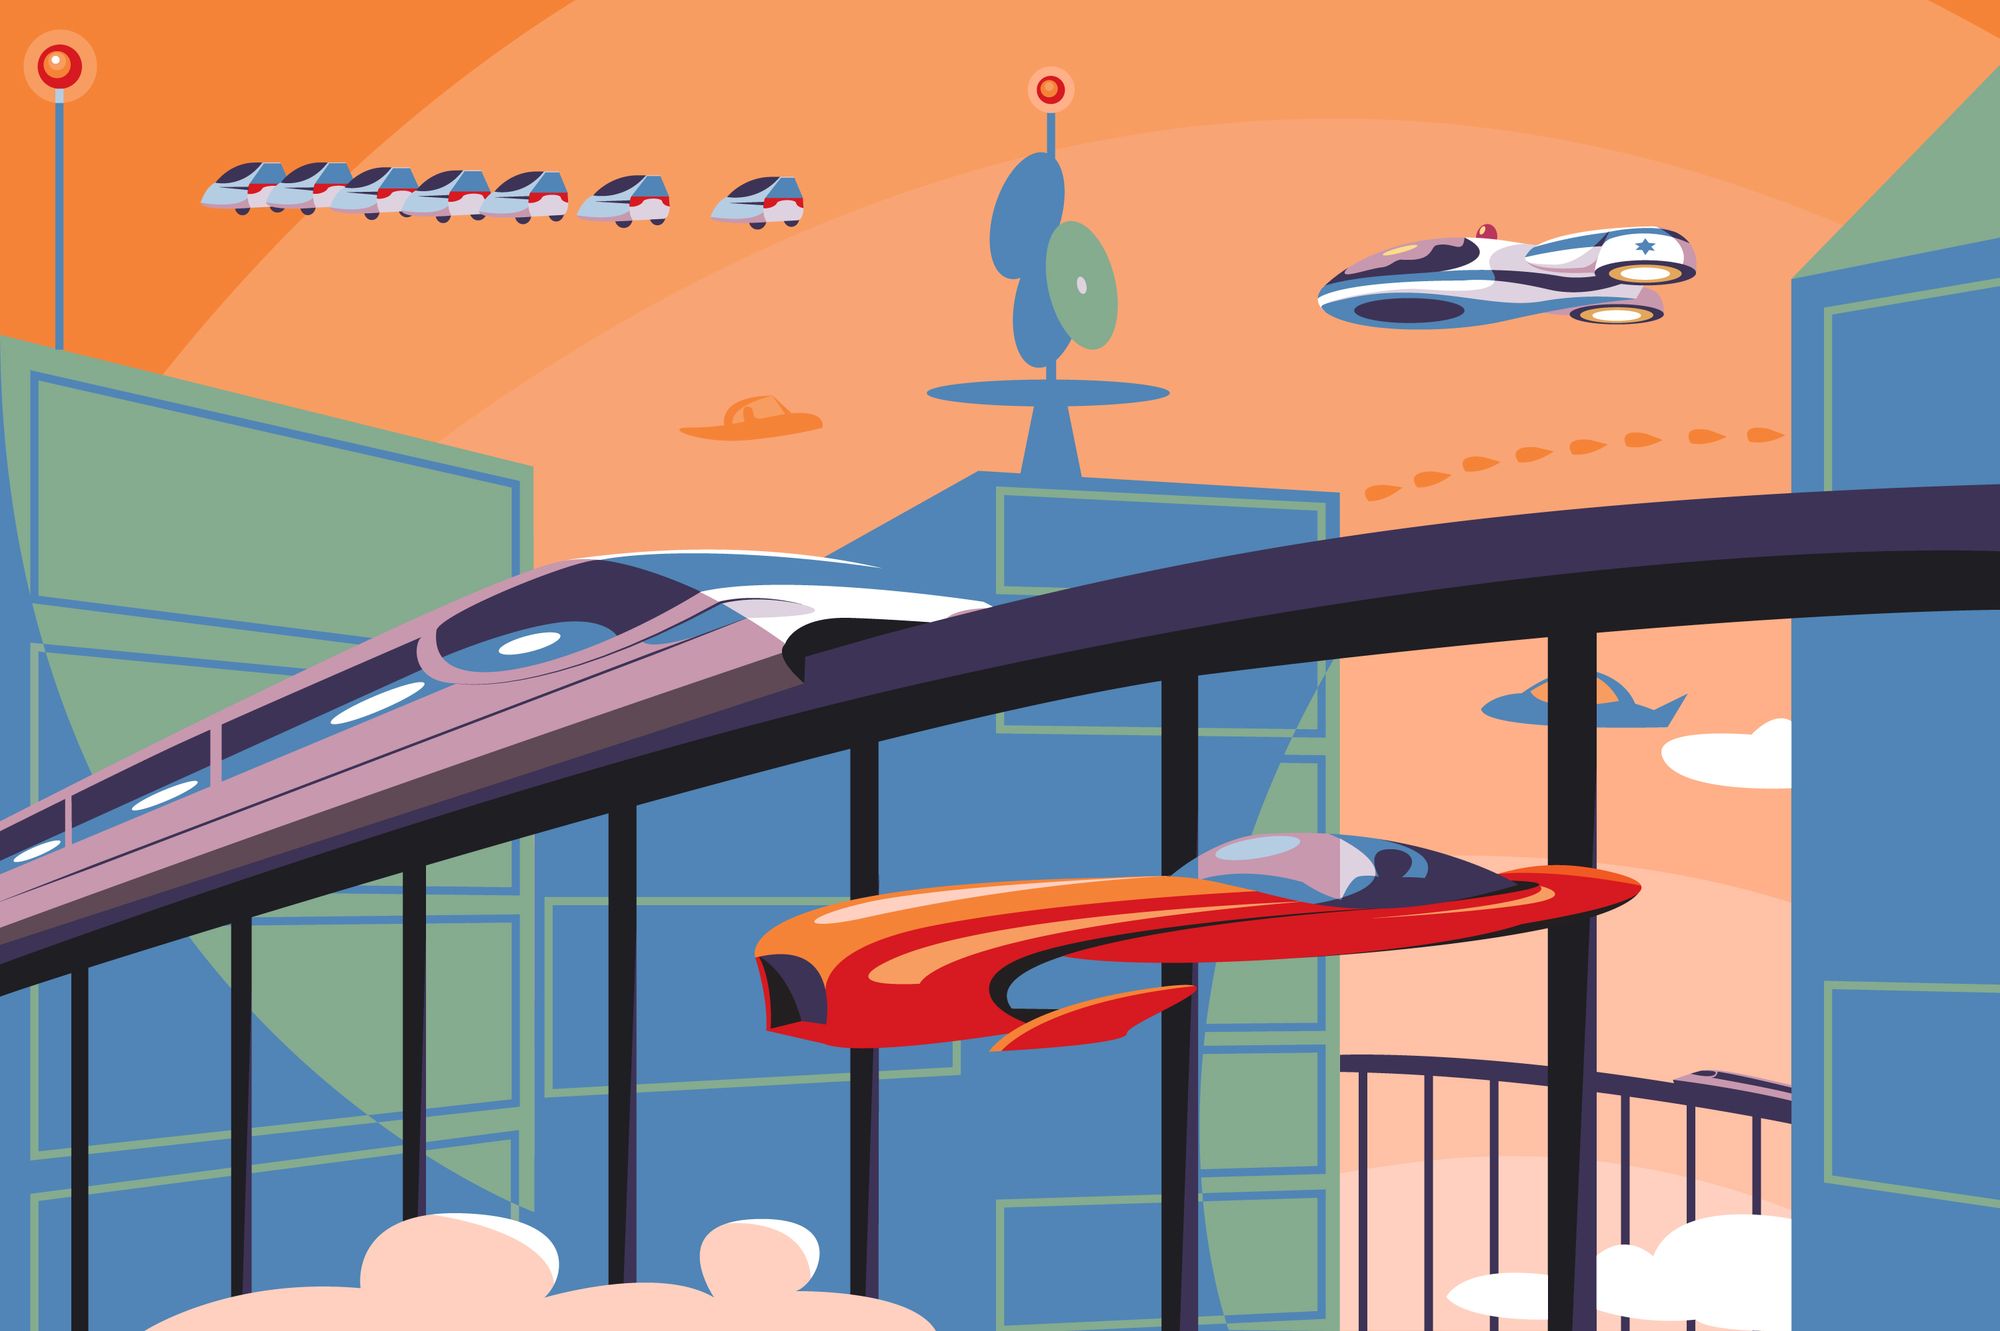 Drawing of futuristic city with flying vehicles and fast-speed bullet trains